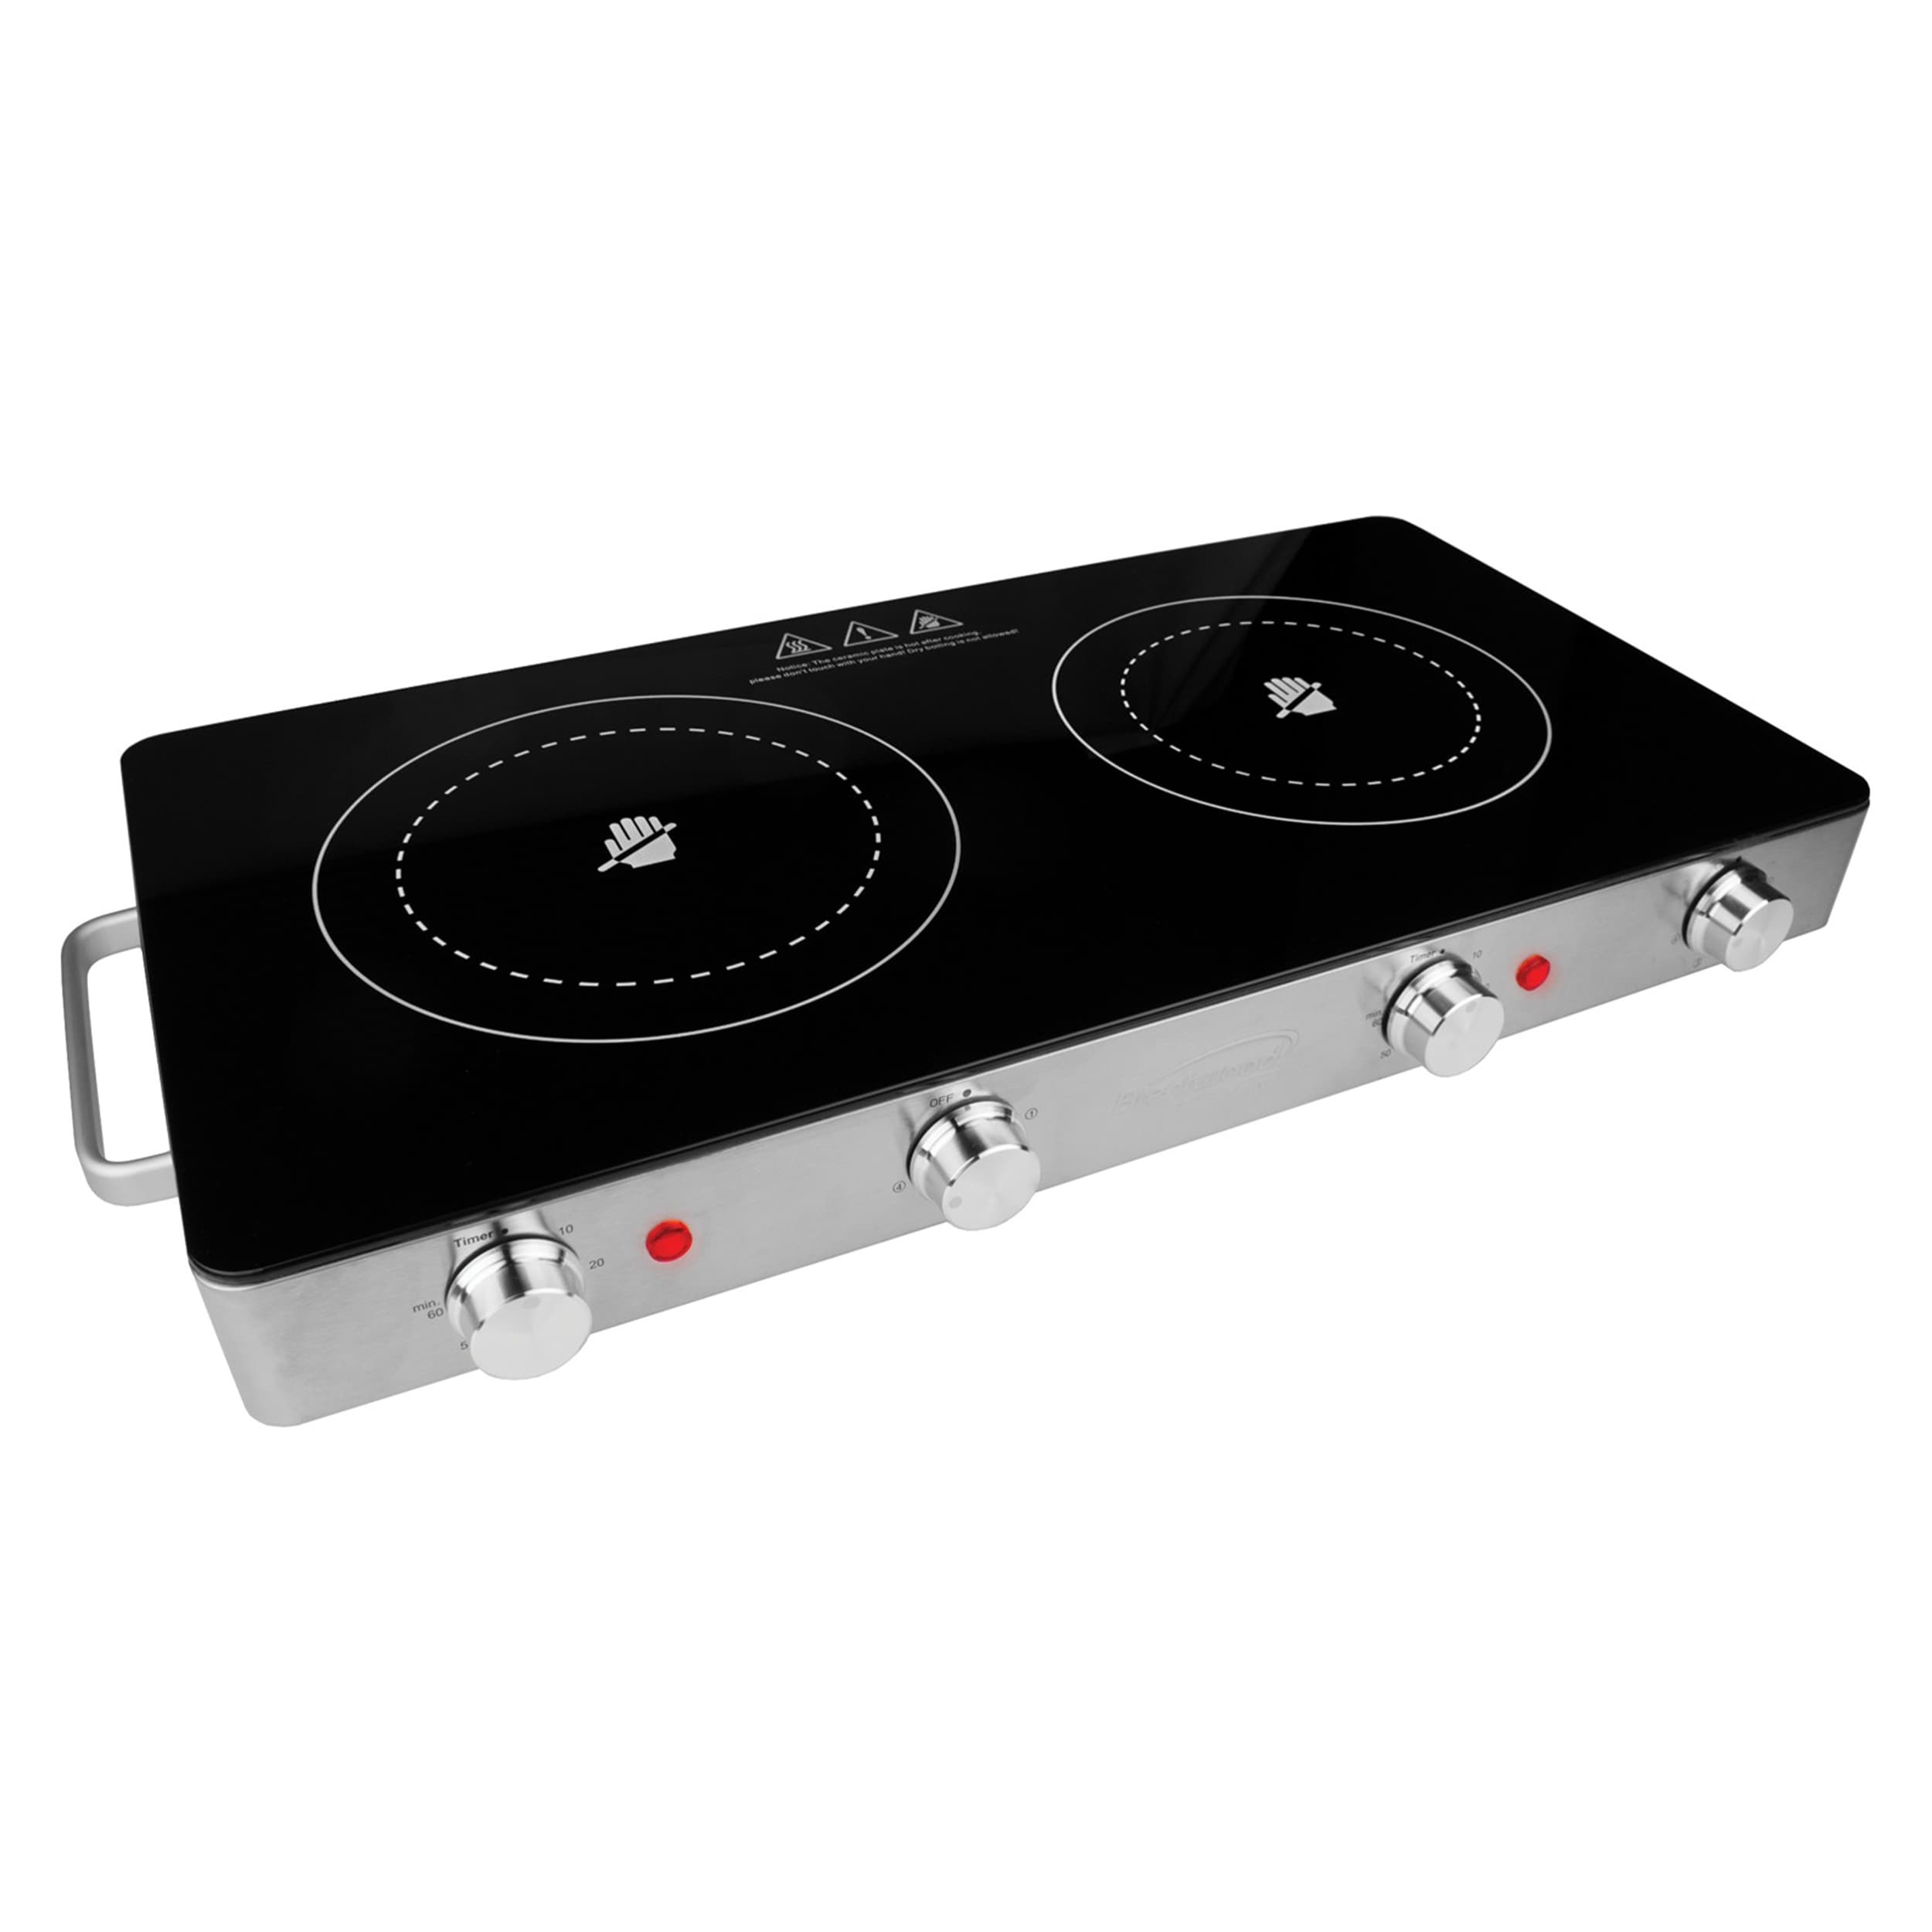 https://ak1.ostkcdn.com/images/products/is/images/direct/07f8b40d041ec3adaeab08f1f858e1f718ceda7e/Brentwood-1800W-Double-Infrared-Electric-Burner-Stainless-Steel.jpg